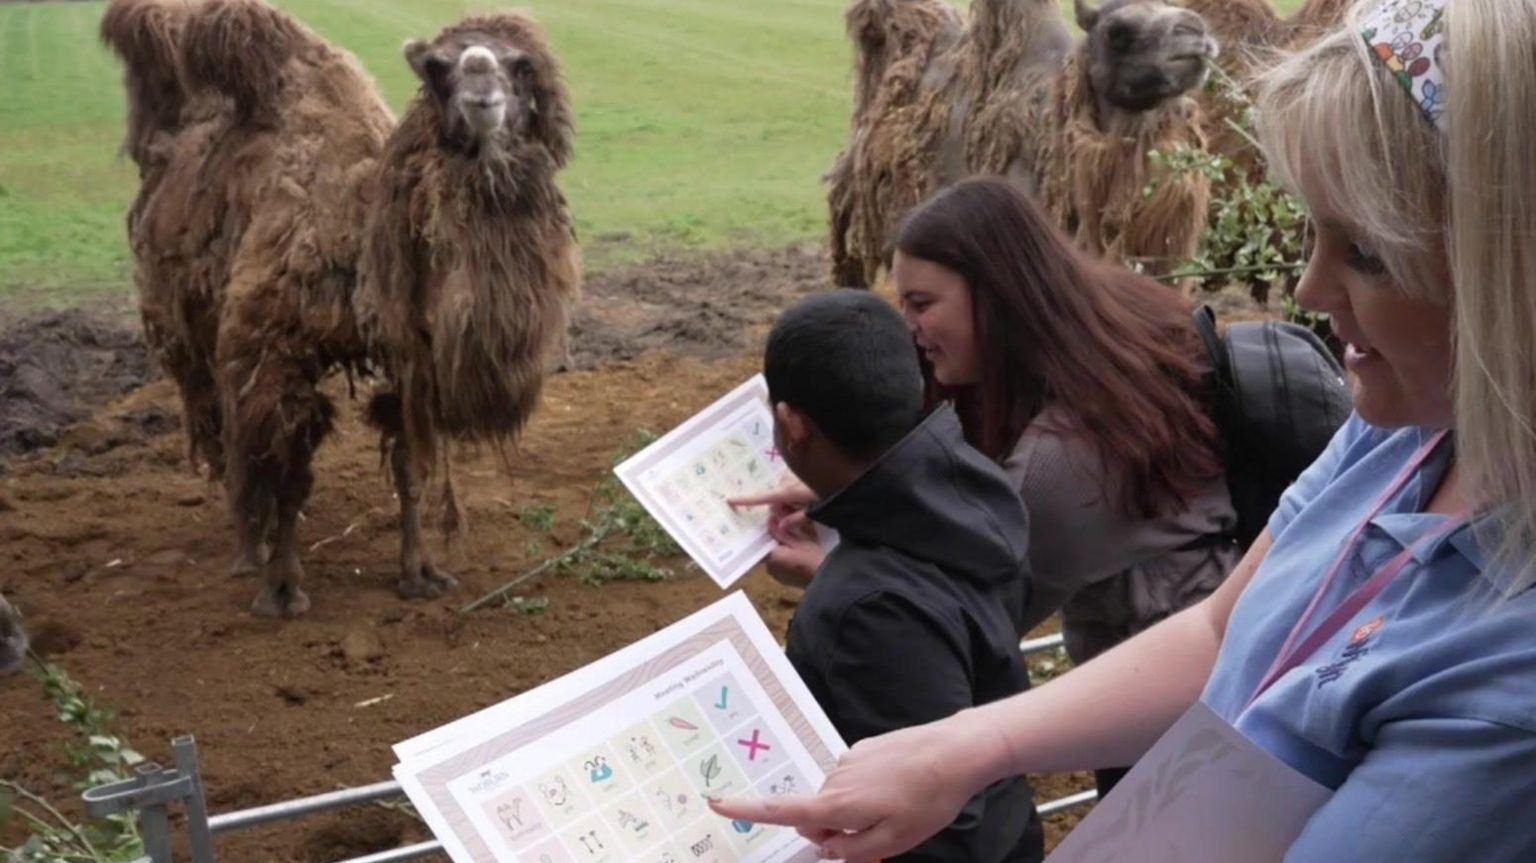 Children feeding camels at the zoo and using the resources